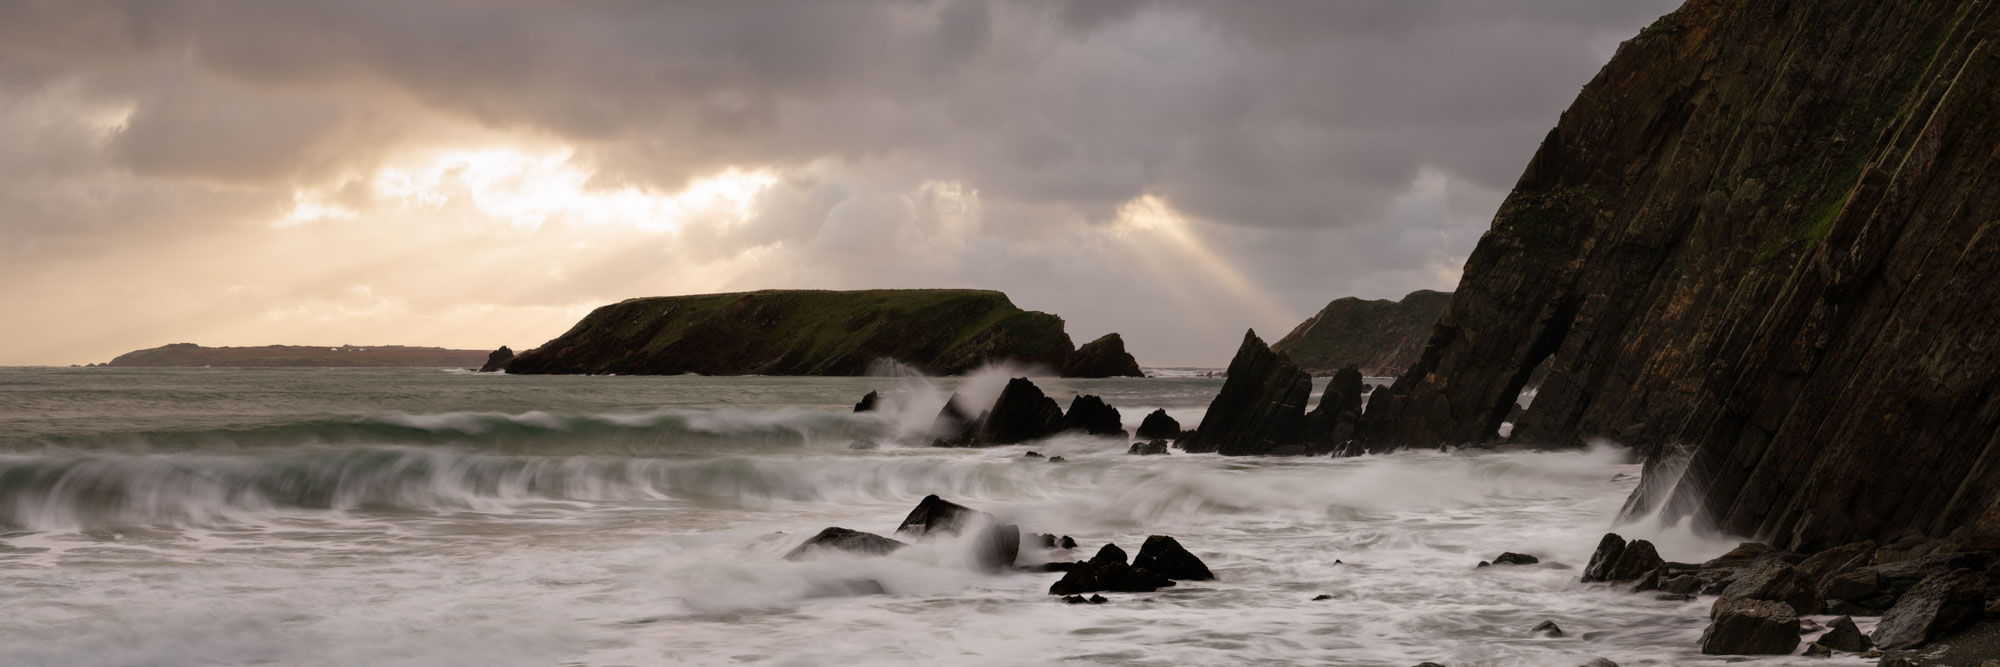 Panorama of Mrloes Sands during a storm as the sun bursts through the clouds